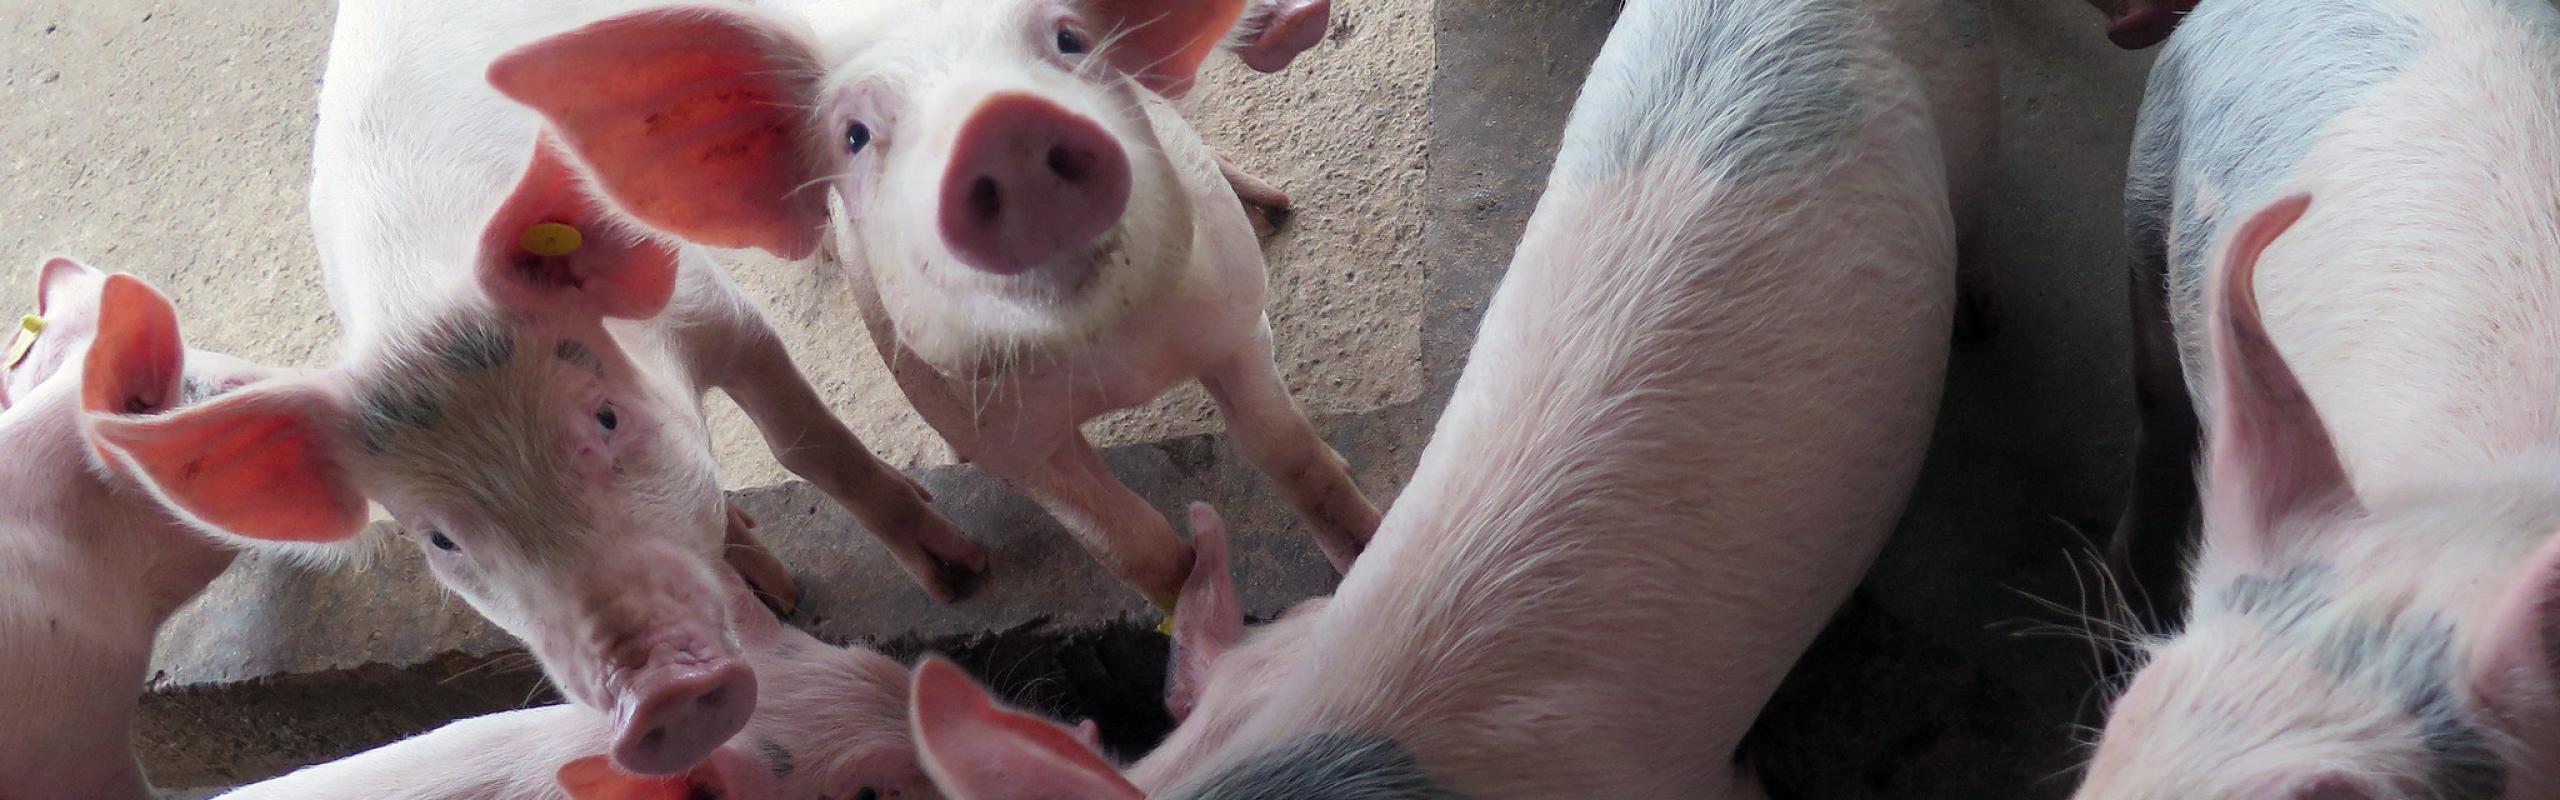 Pigs with ear tags stand in a dirty enclosure and look up at camera